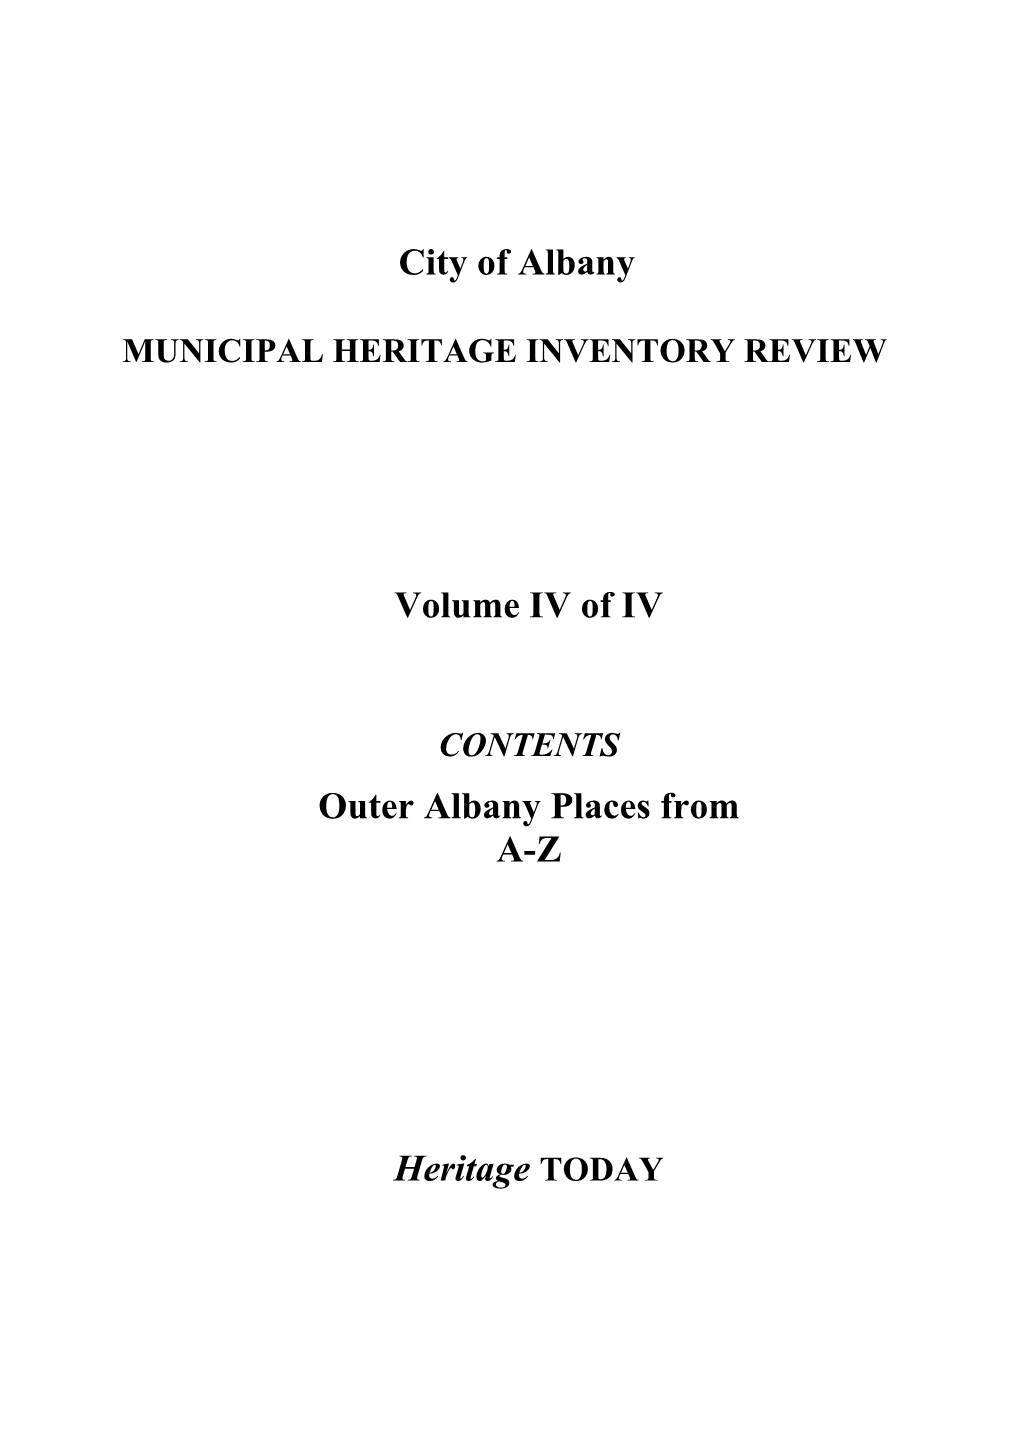 Municipal Heritage Inventory Review